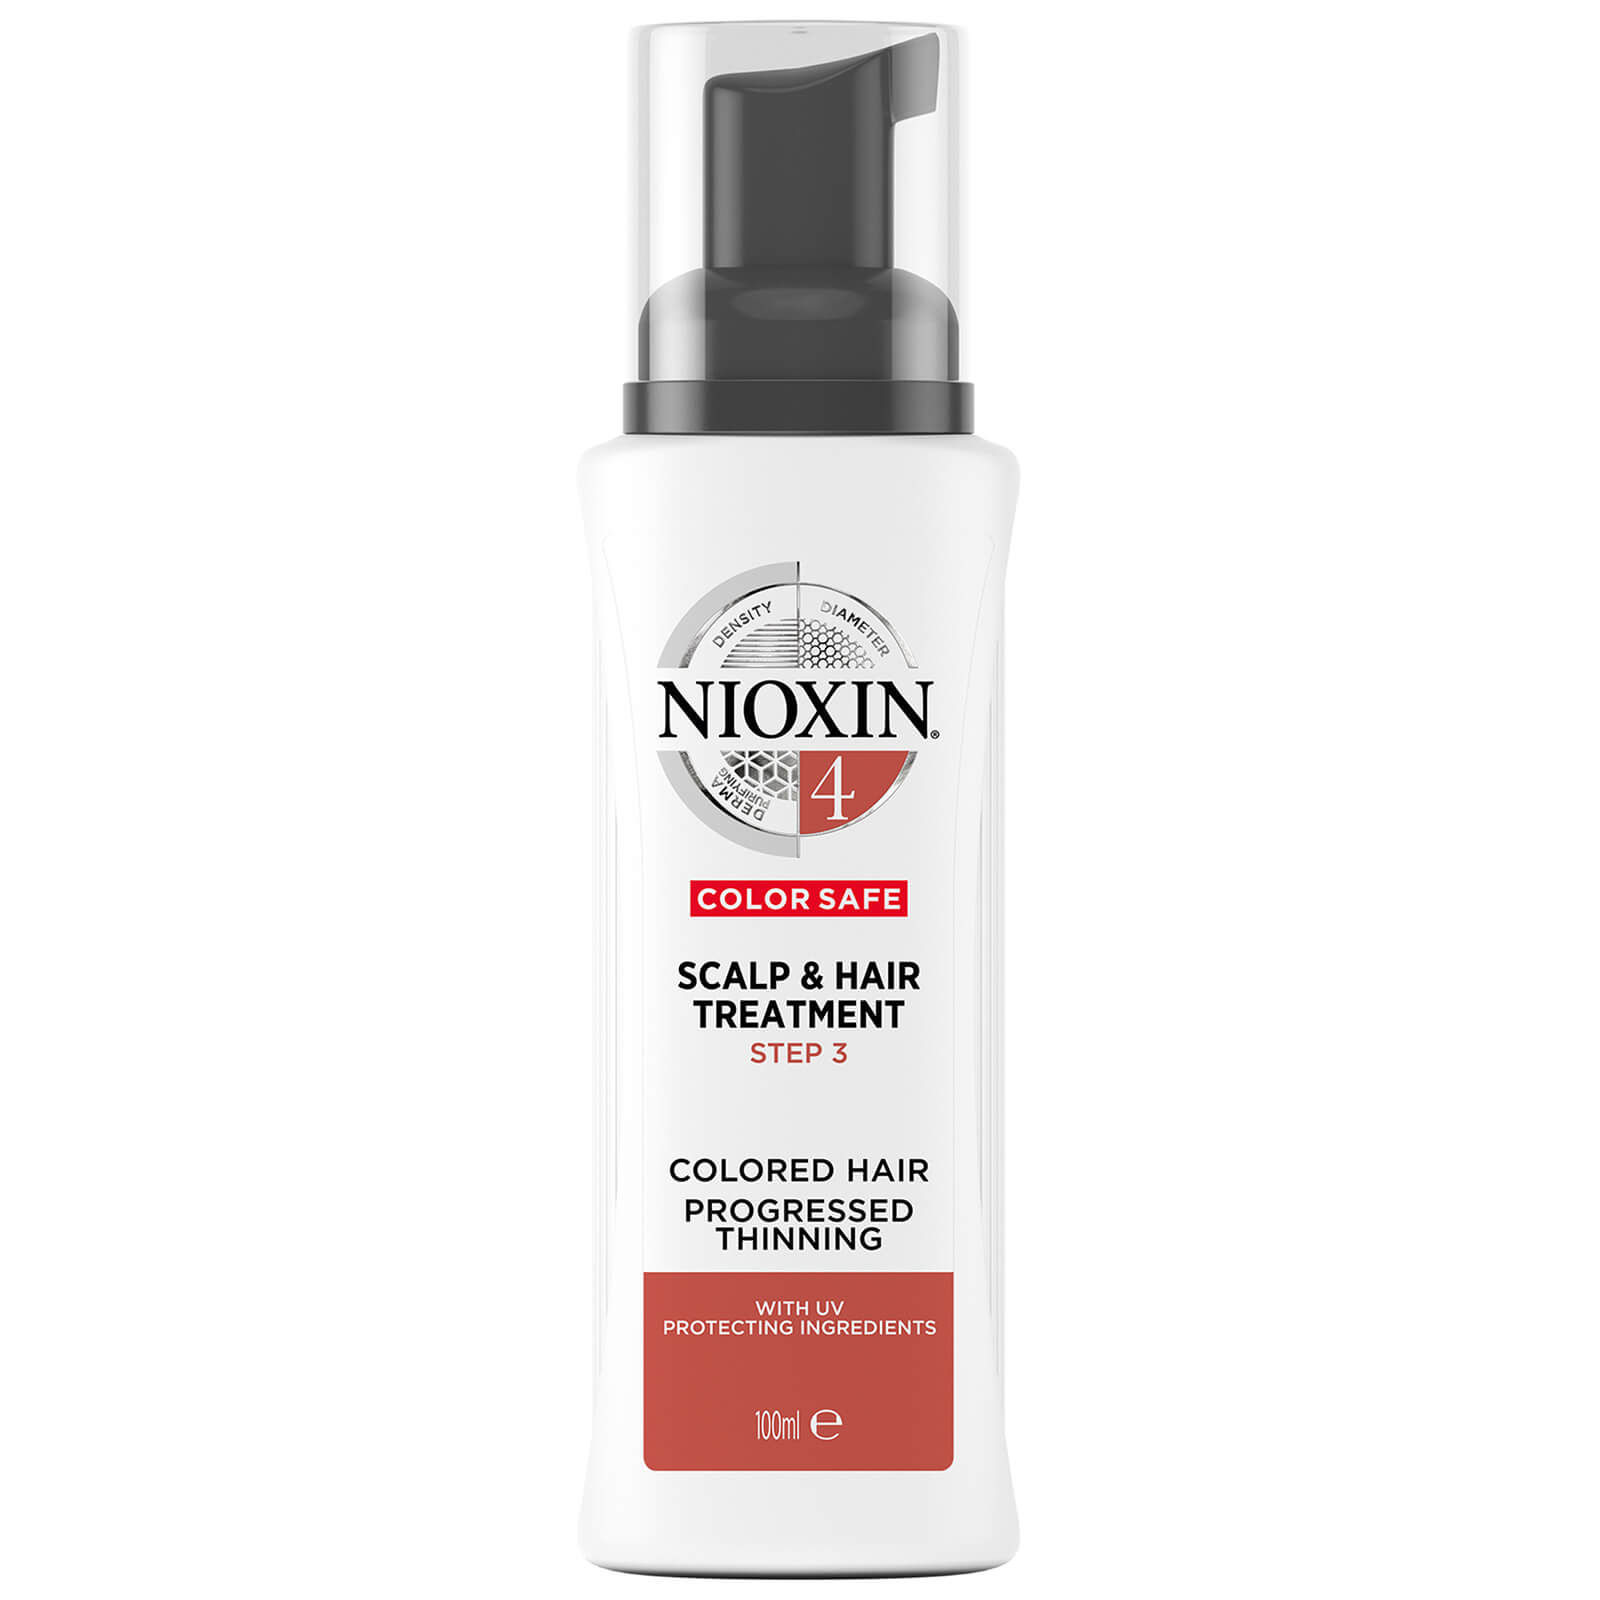 NIOXIN 3-Part System 4 Scalp and Hair Treatment for Coloured Hair with Progressed Thinning 100ml